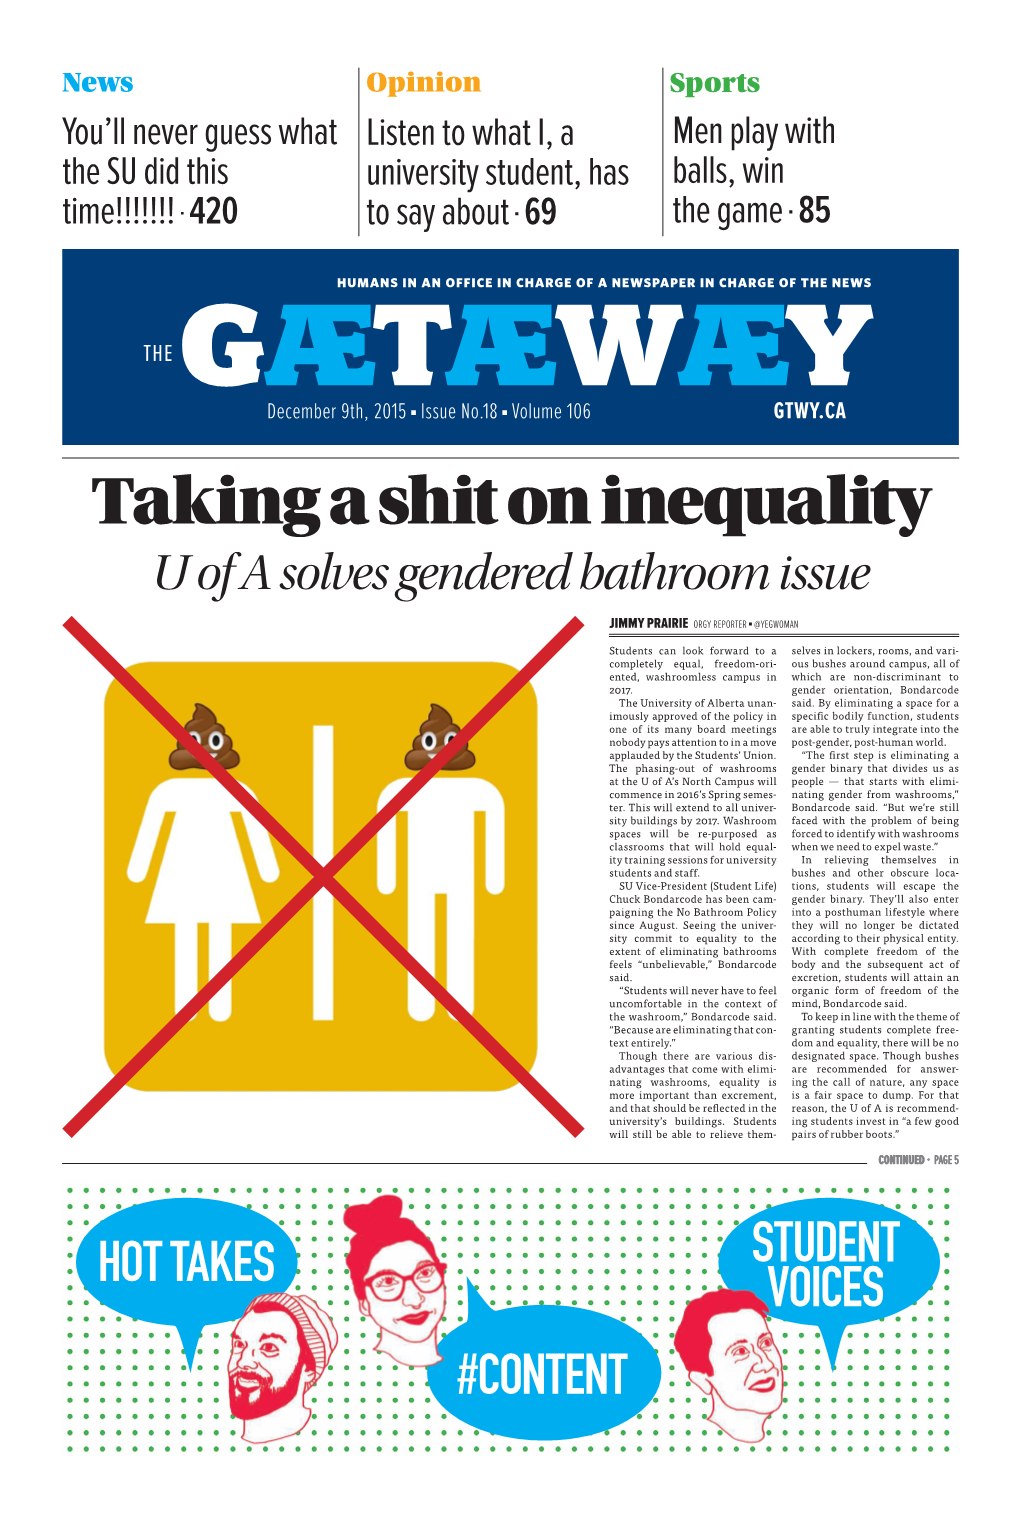 Taking a Shit on Inequality U of a Solves Gendered Bathroom Issue